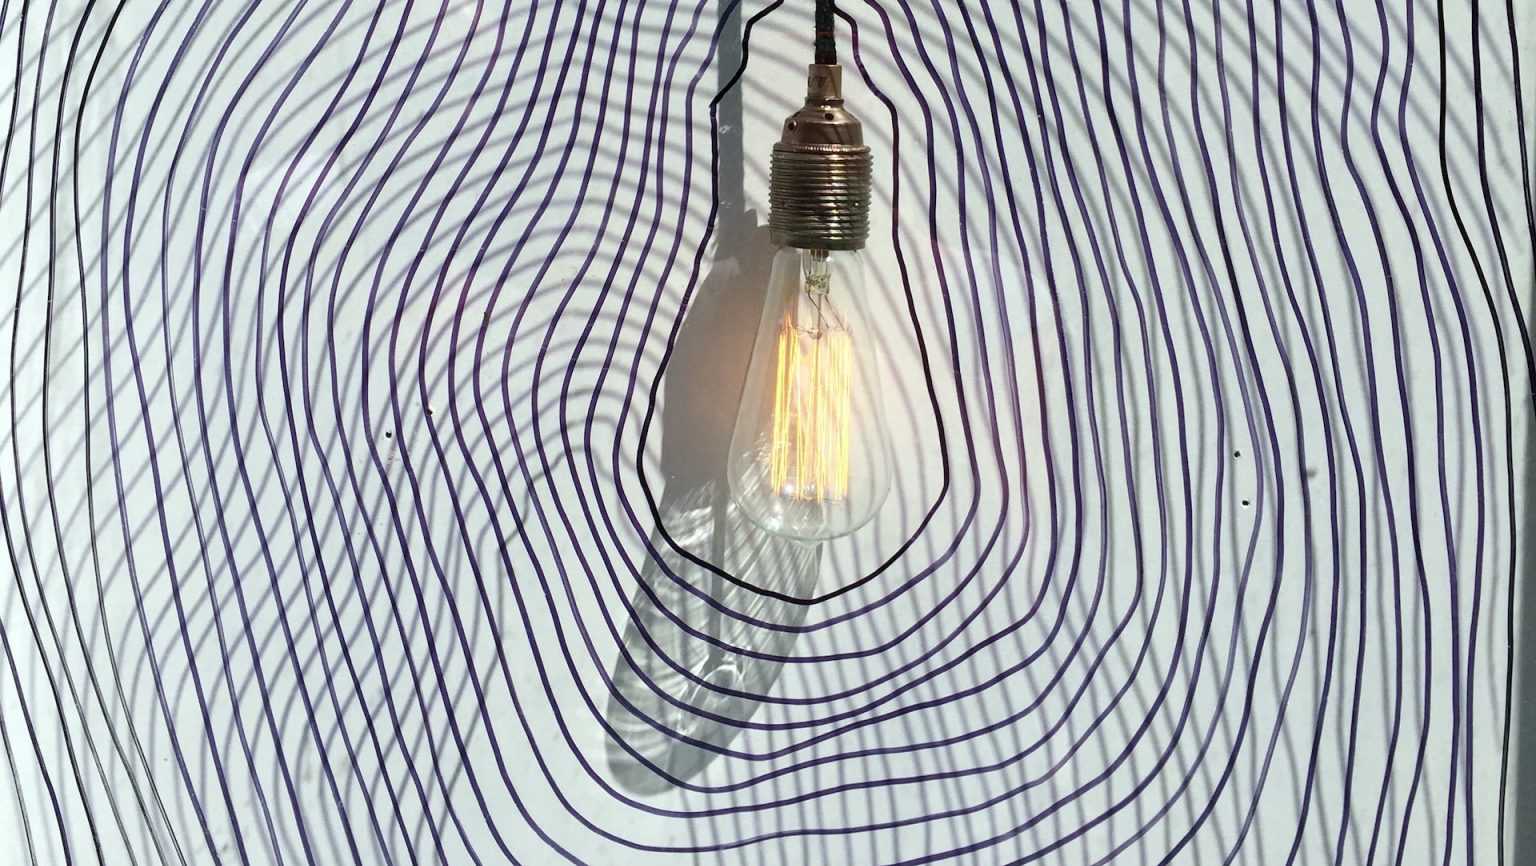 A light bulb hanging on a wall with a swirl pattern.